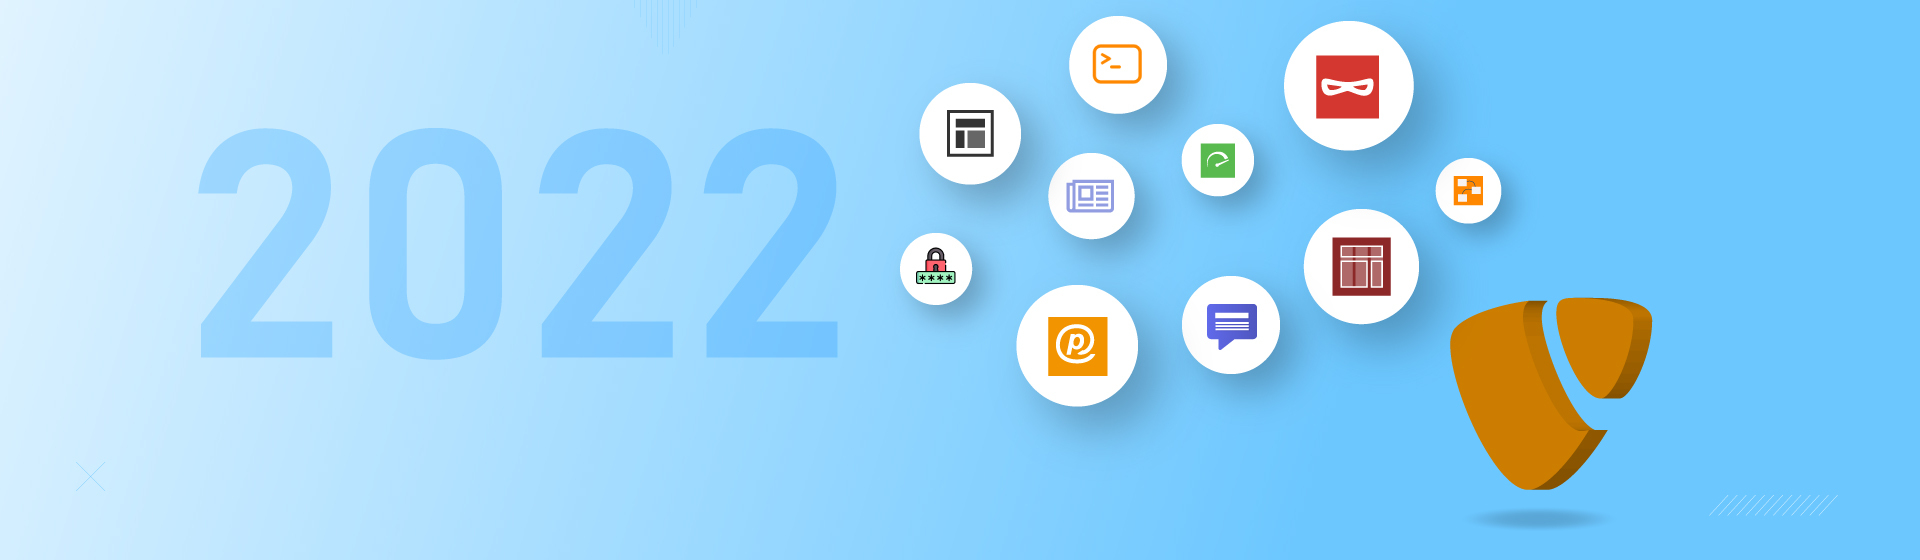 12 Awesome TYPO3 Extensions You Should Know in 2022